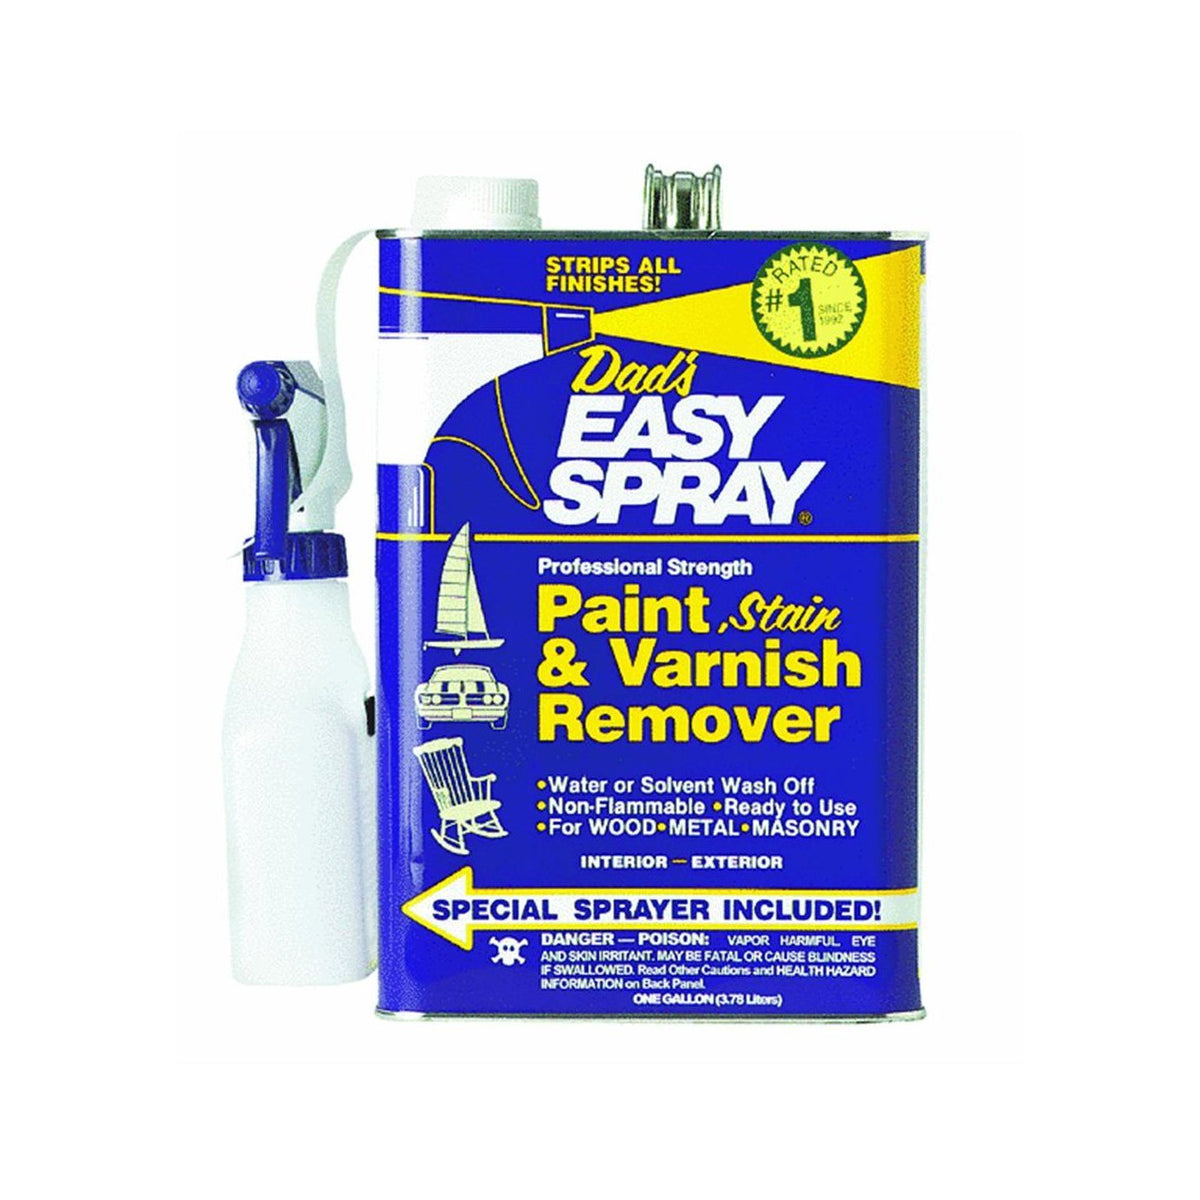 Buy dad's easy spray near me - Online store for sundries, paint strippers & removers in USA, on sale, low price, discount deals, coupon code